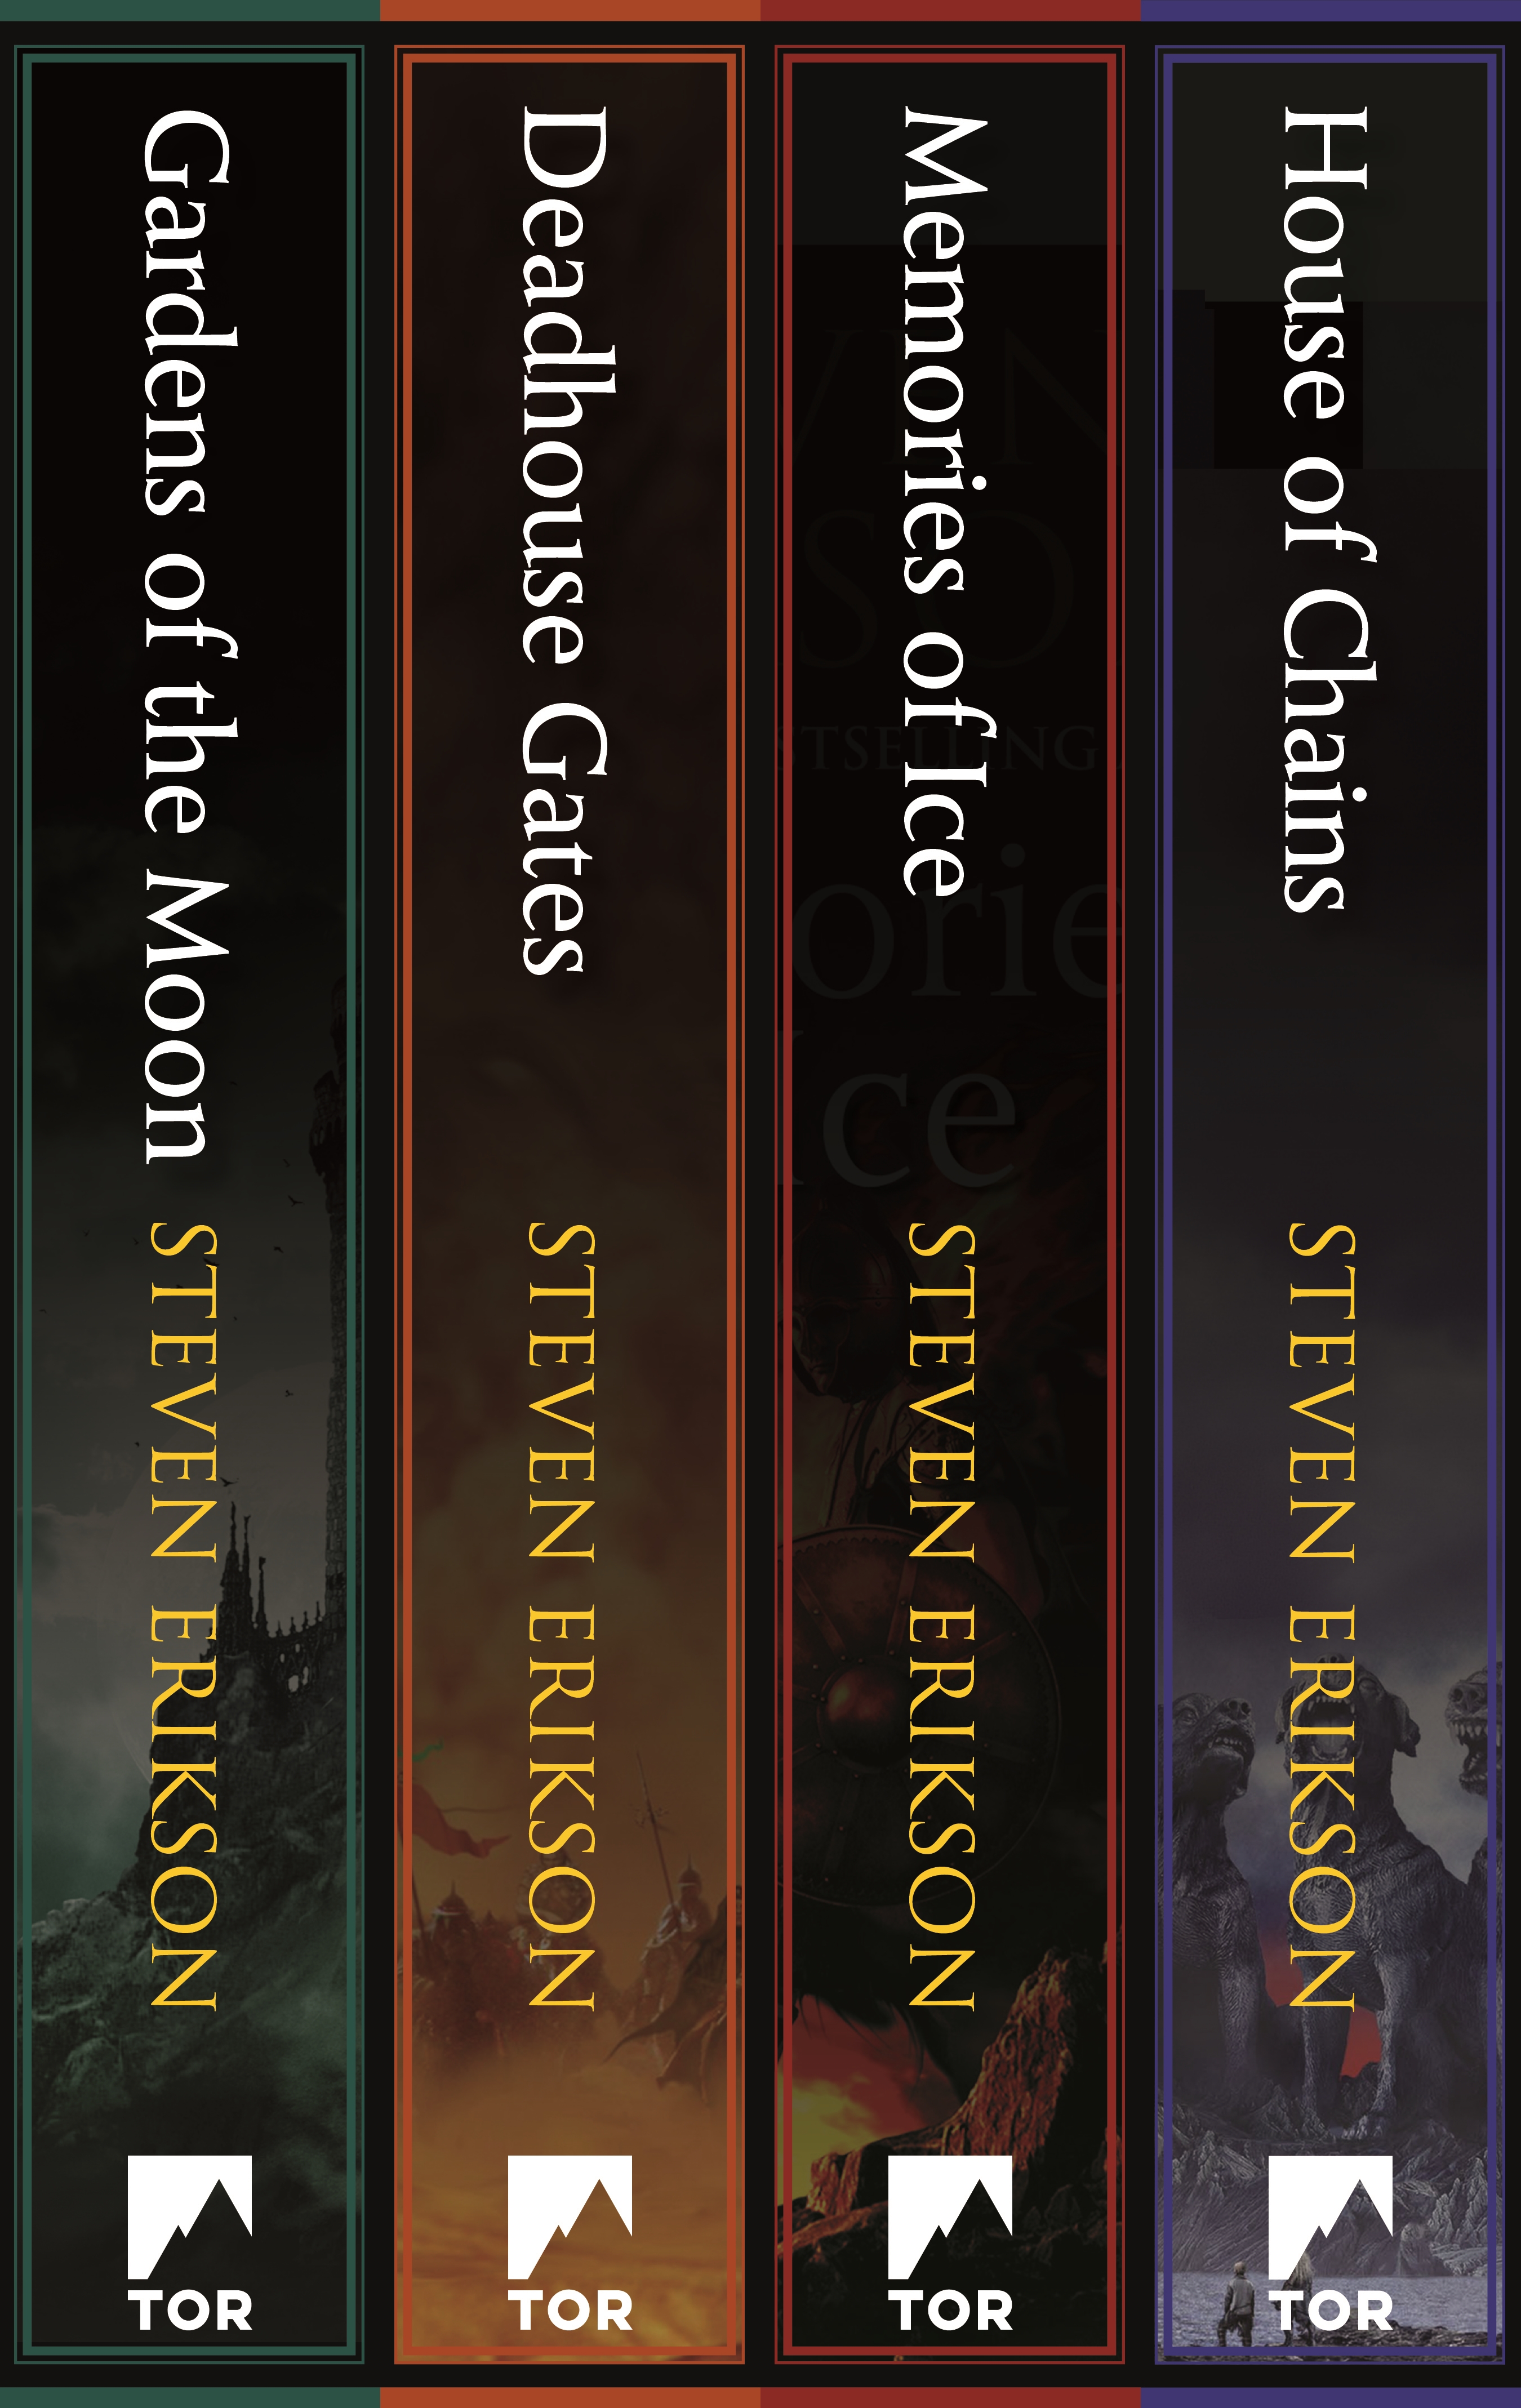 Malazan Book of the Fallen: Books 1-4 : Gardens of the Moon, Deadhouse Gates, Memories of Ice, House of Chains by Steven Erikson